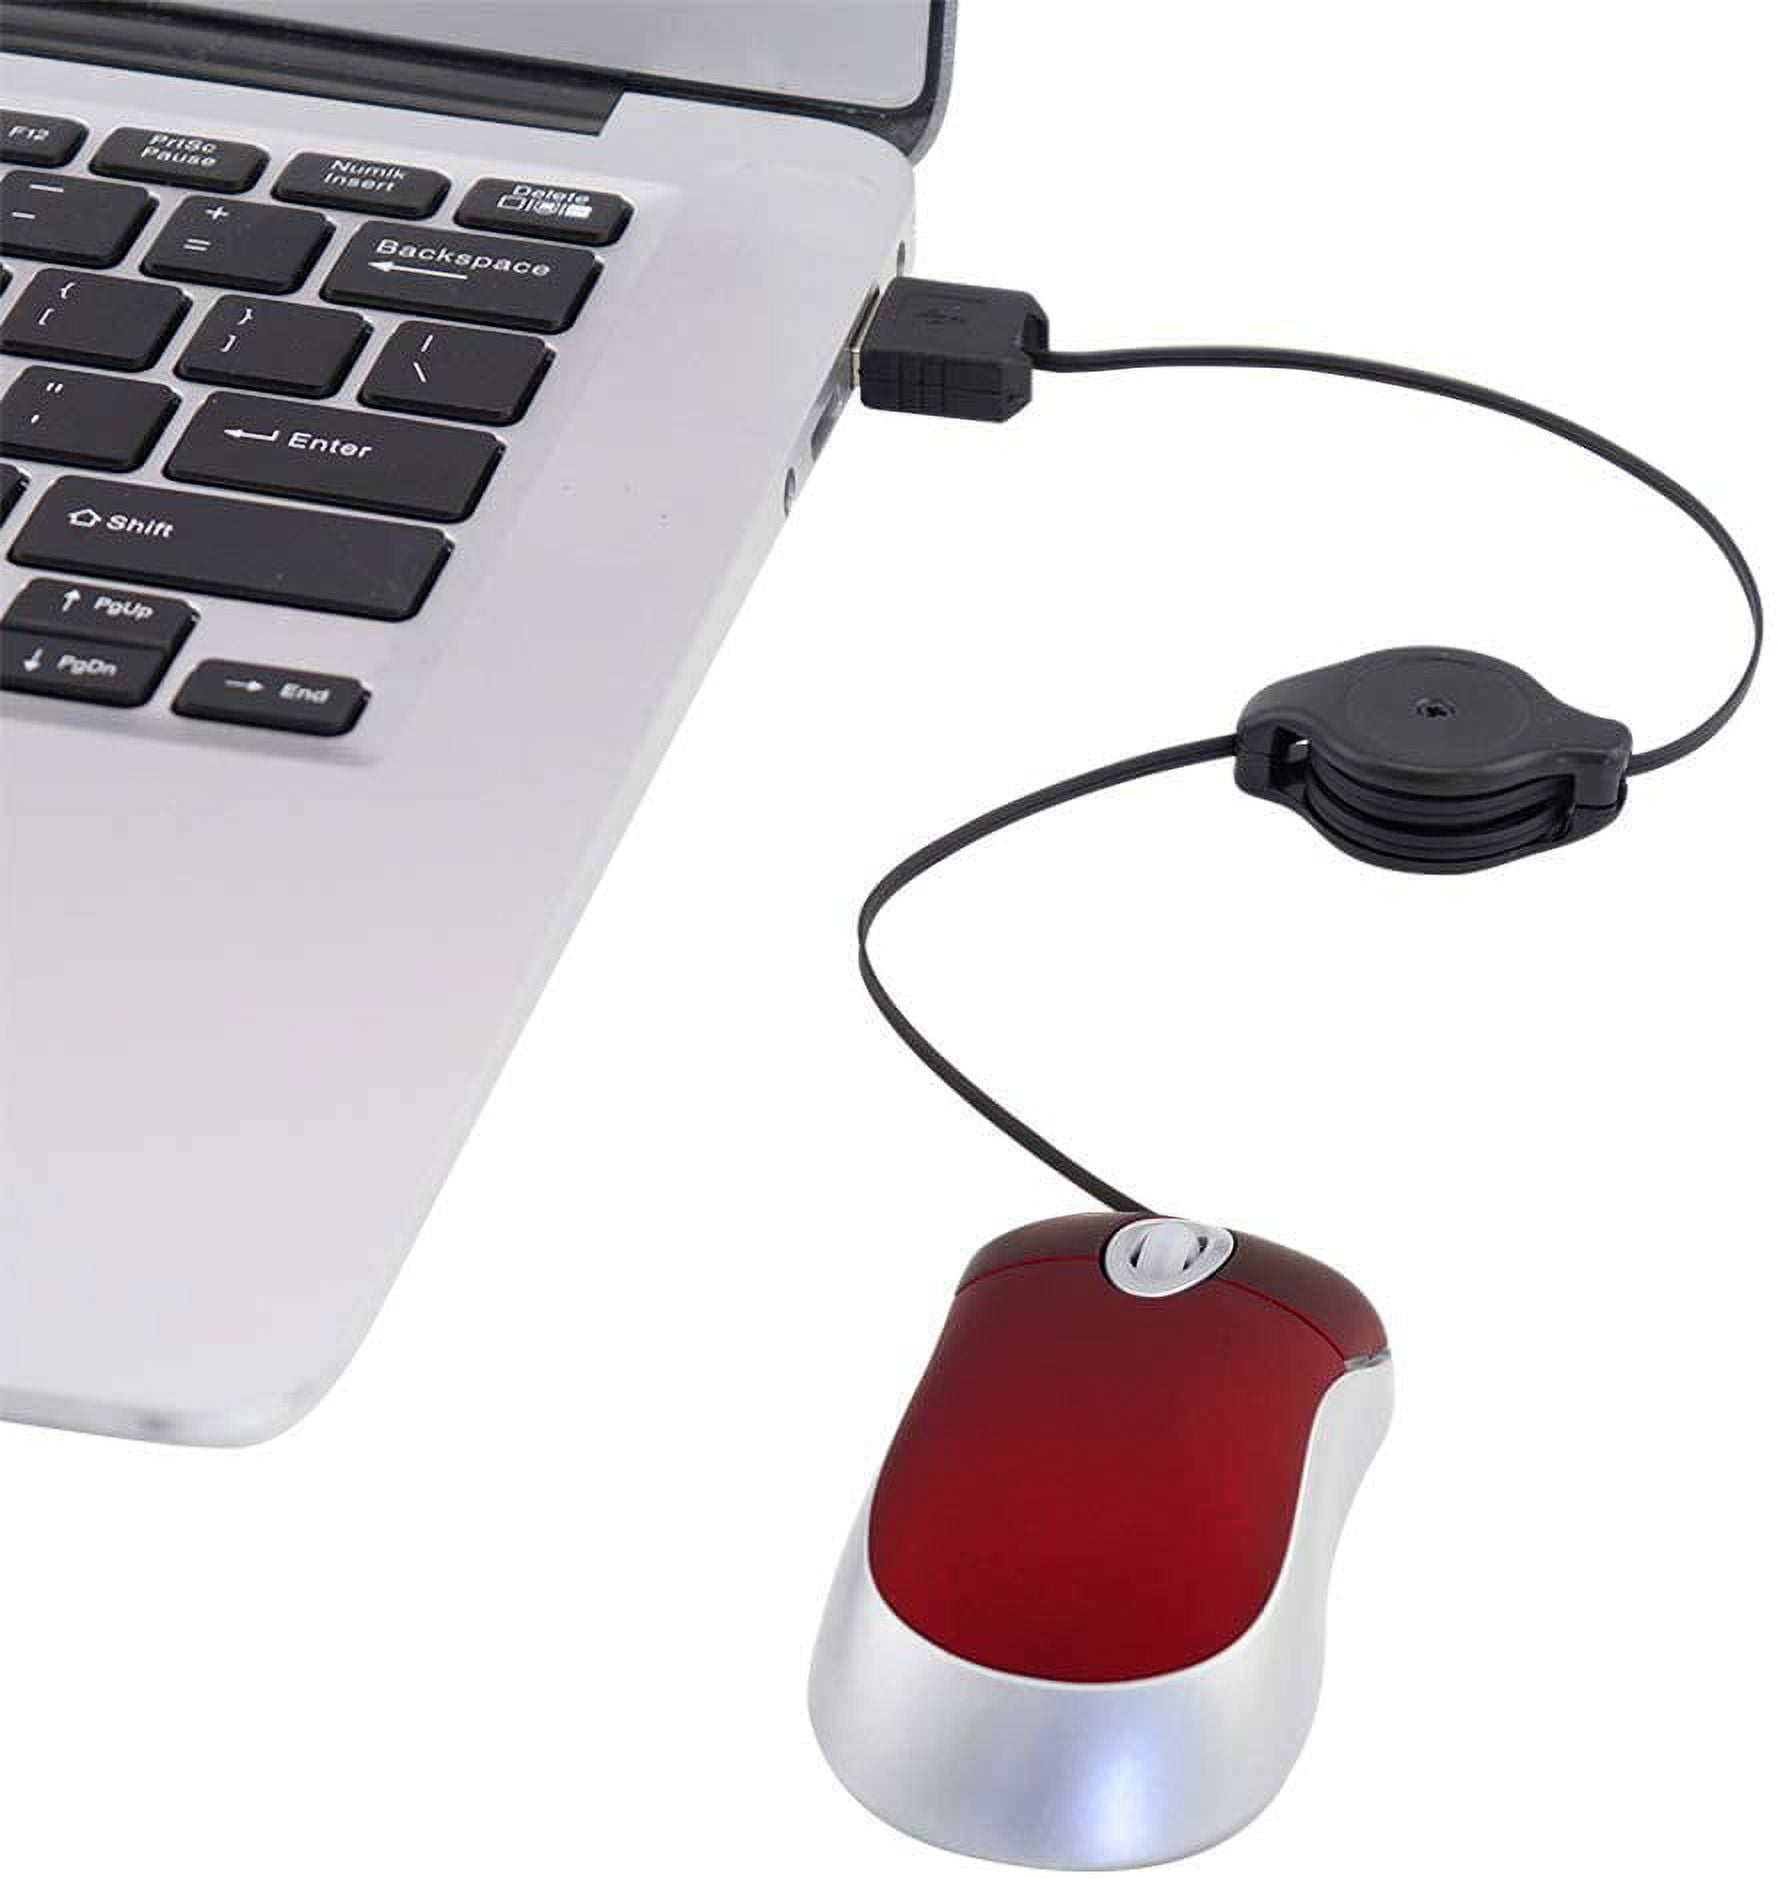 Mini USB Wired Mouse,Retractable Cable Tiny Small Mouse for 3-8